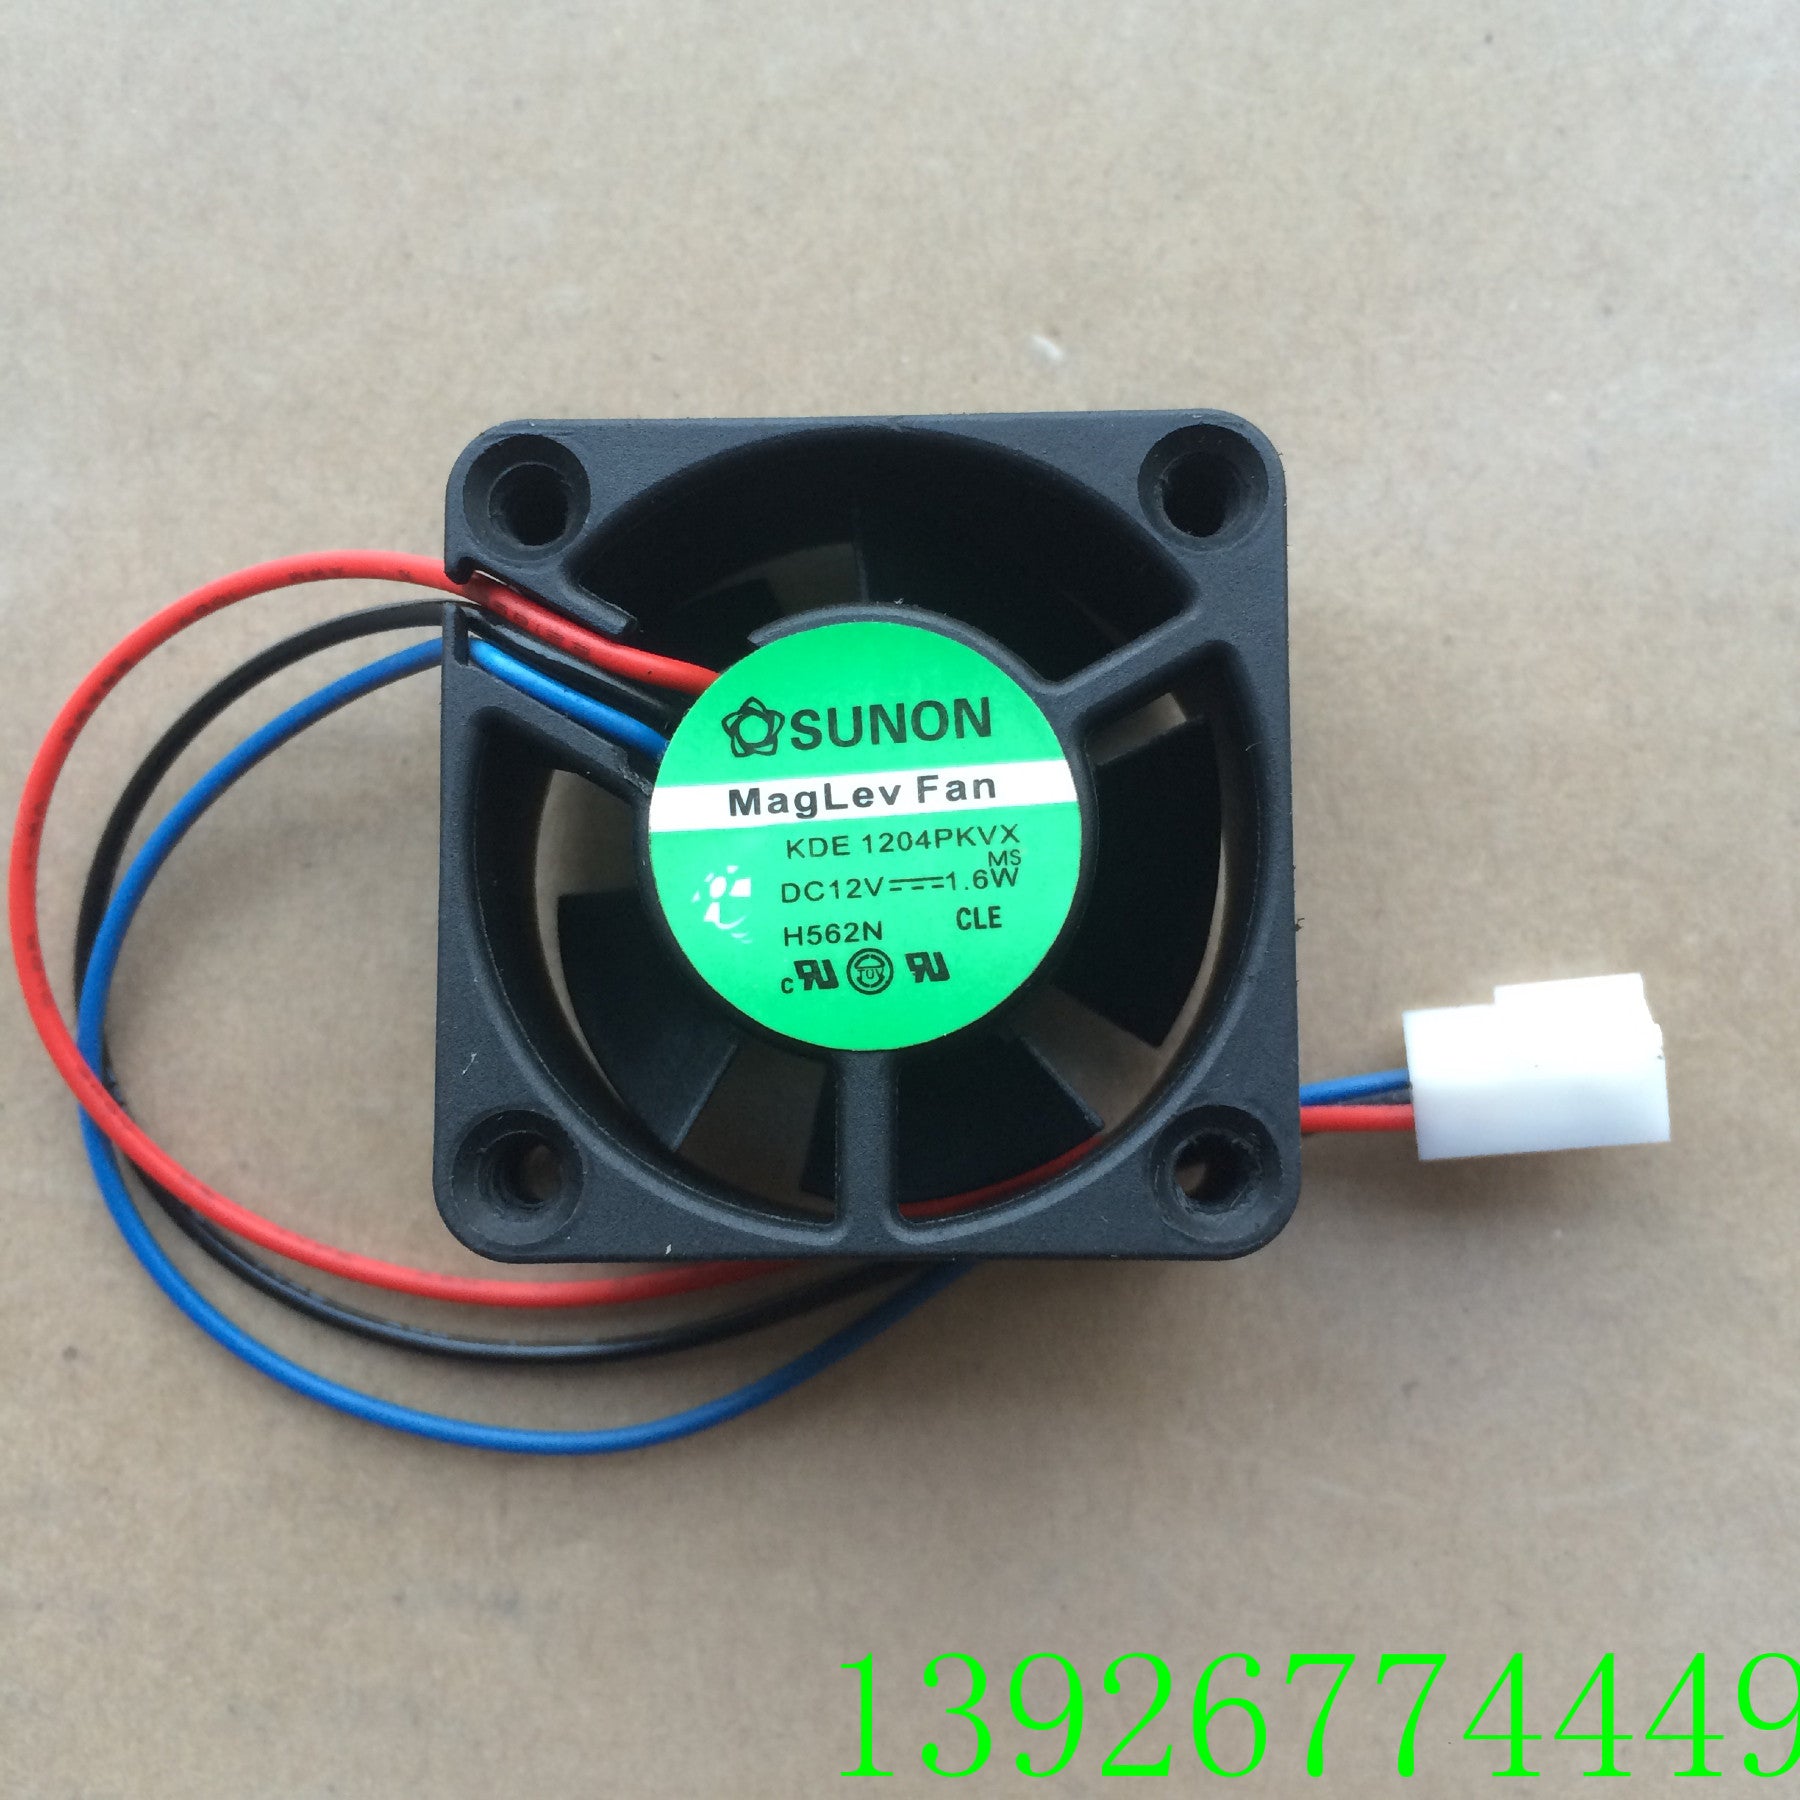 SUNON 4020 12V 1.6W KDE1204PKVX 3-Wire Speed Switch Chassis Cooling Fan